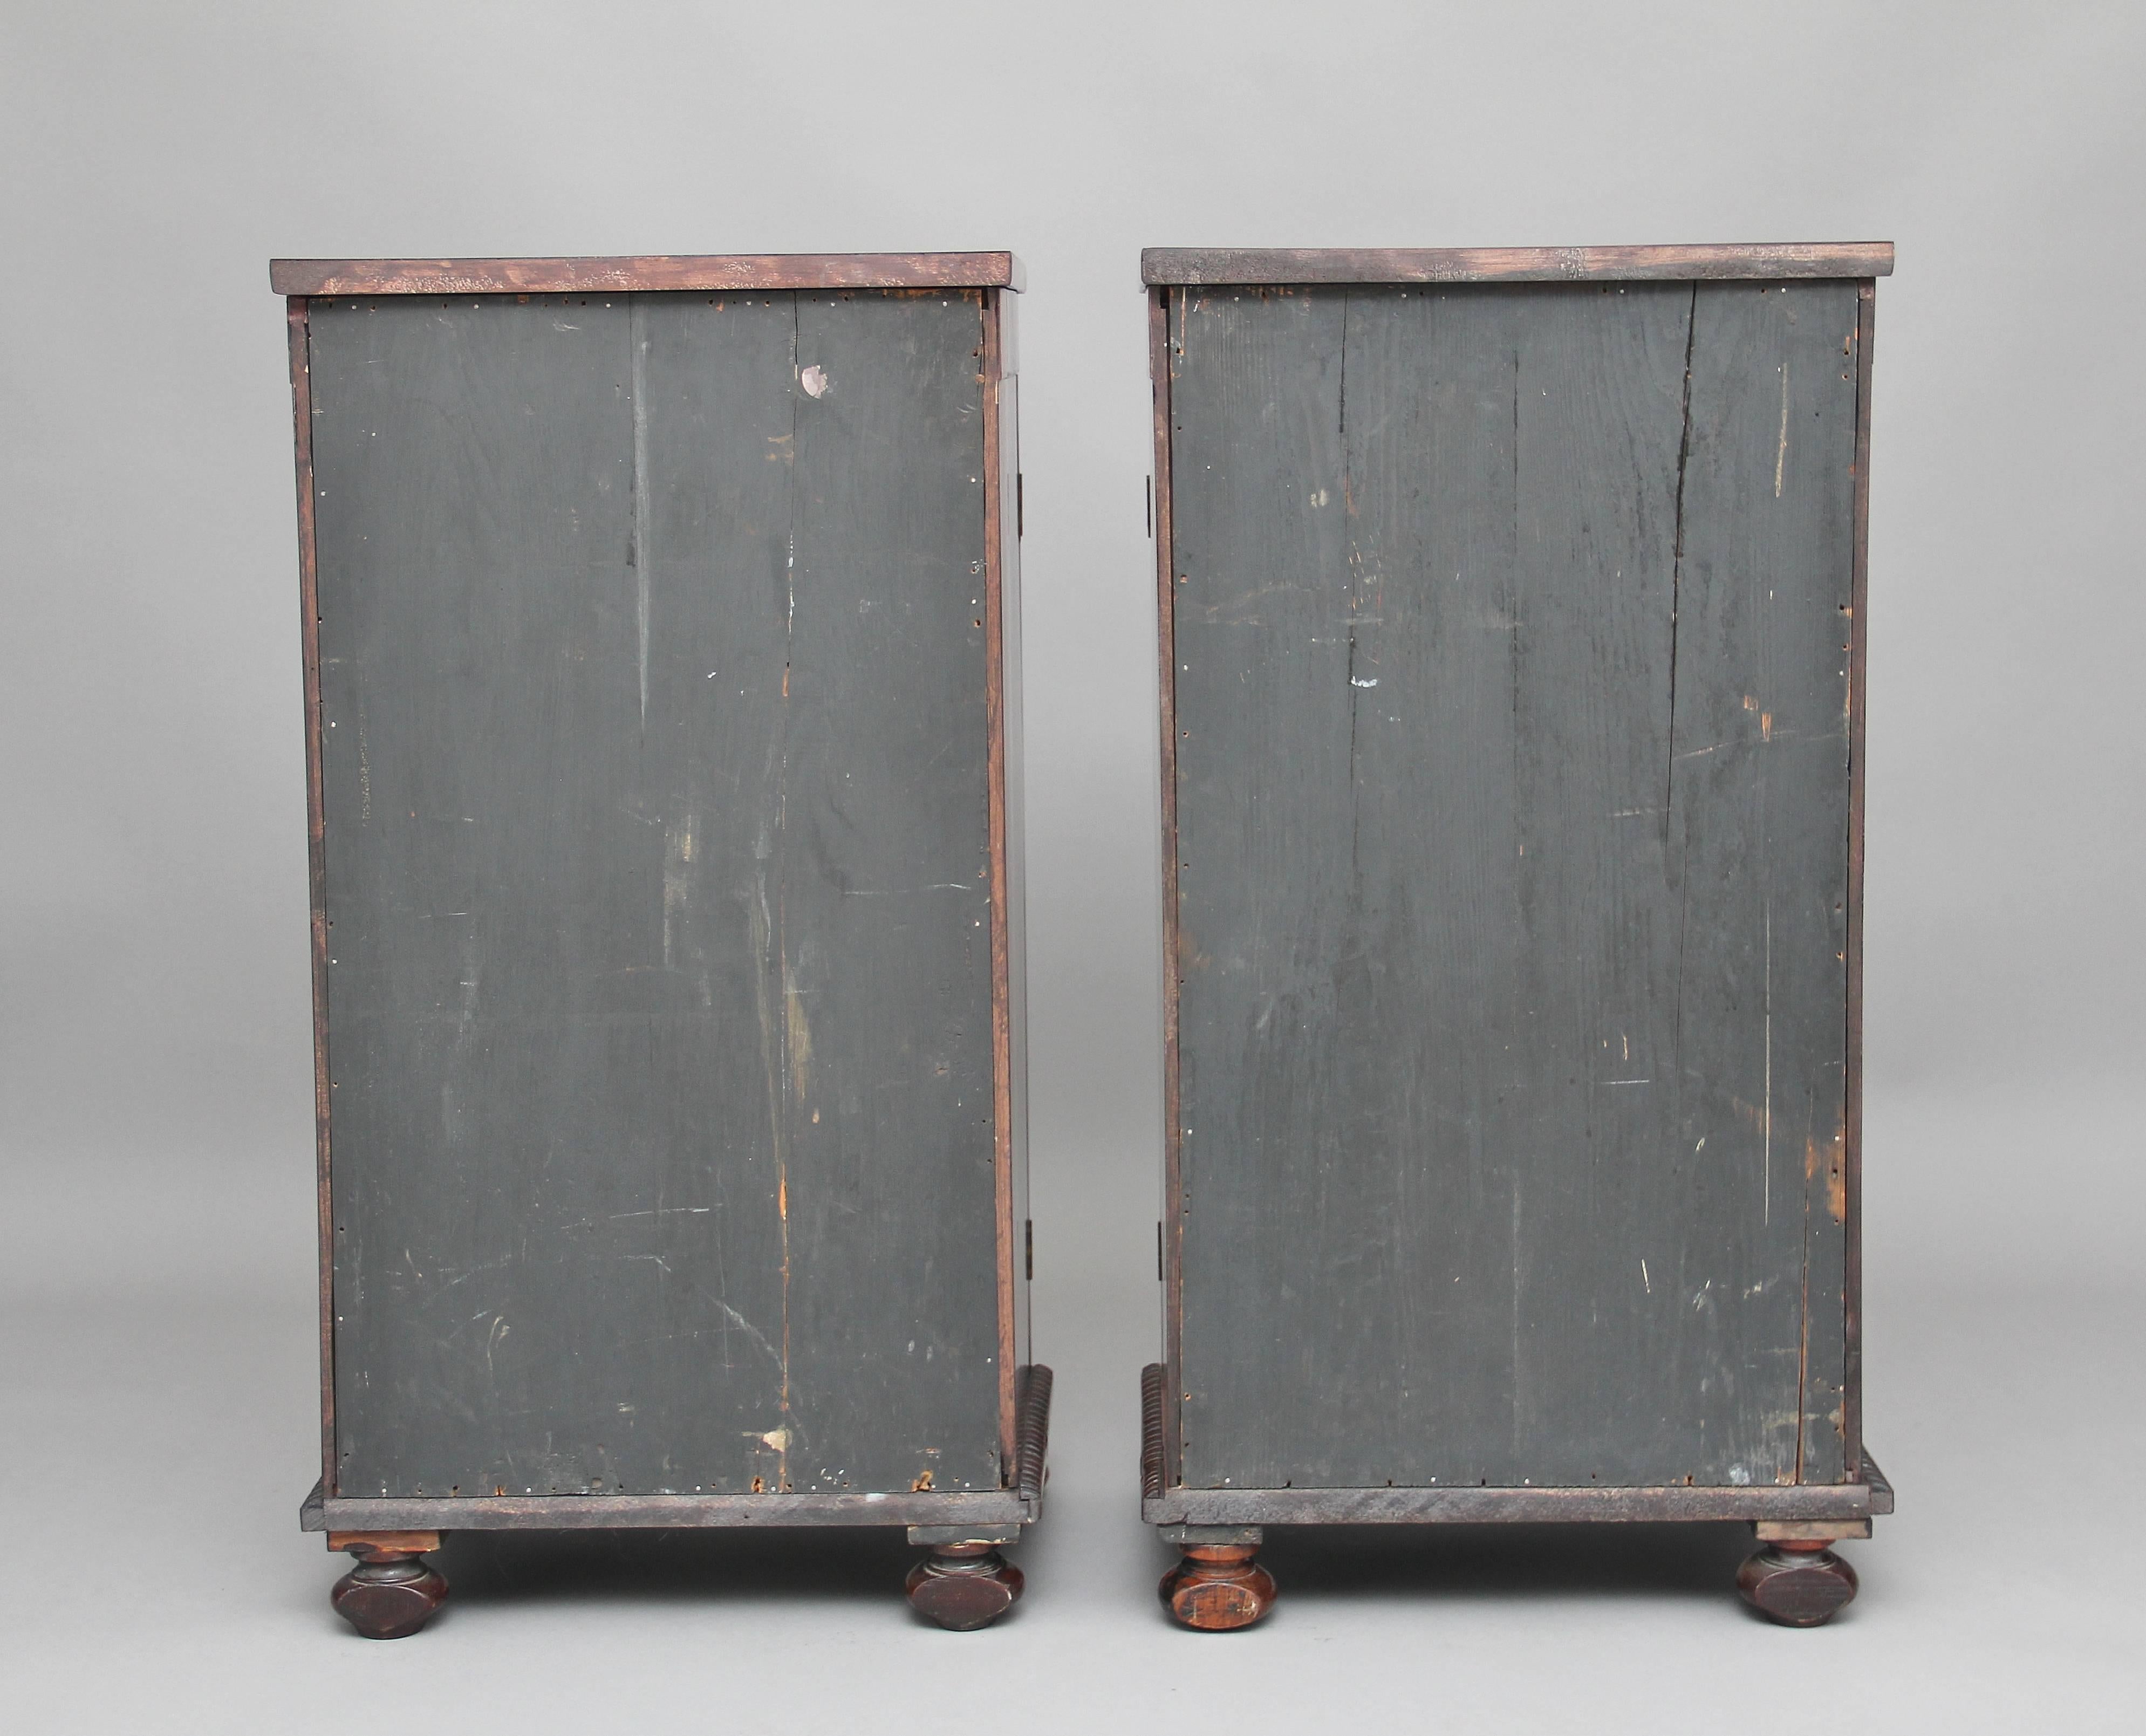 Pair of Early 19th Century Rosewood Pedestal Cabinets In Good Condition For Sale In Martlesham, GB